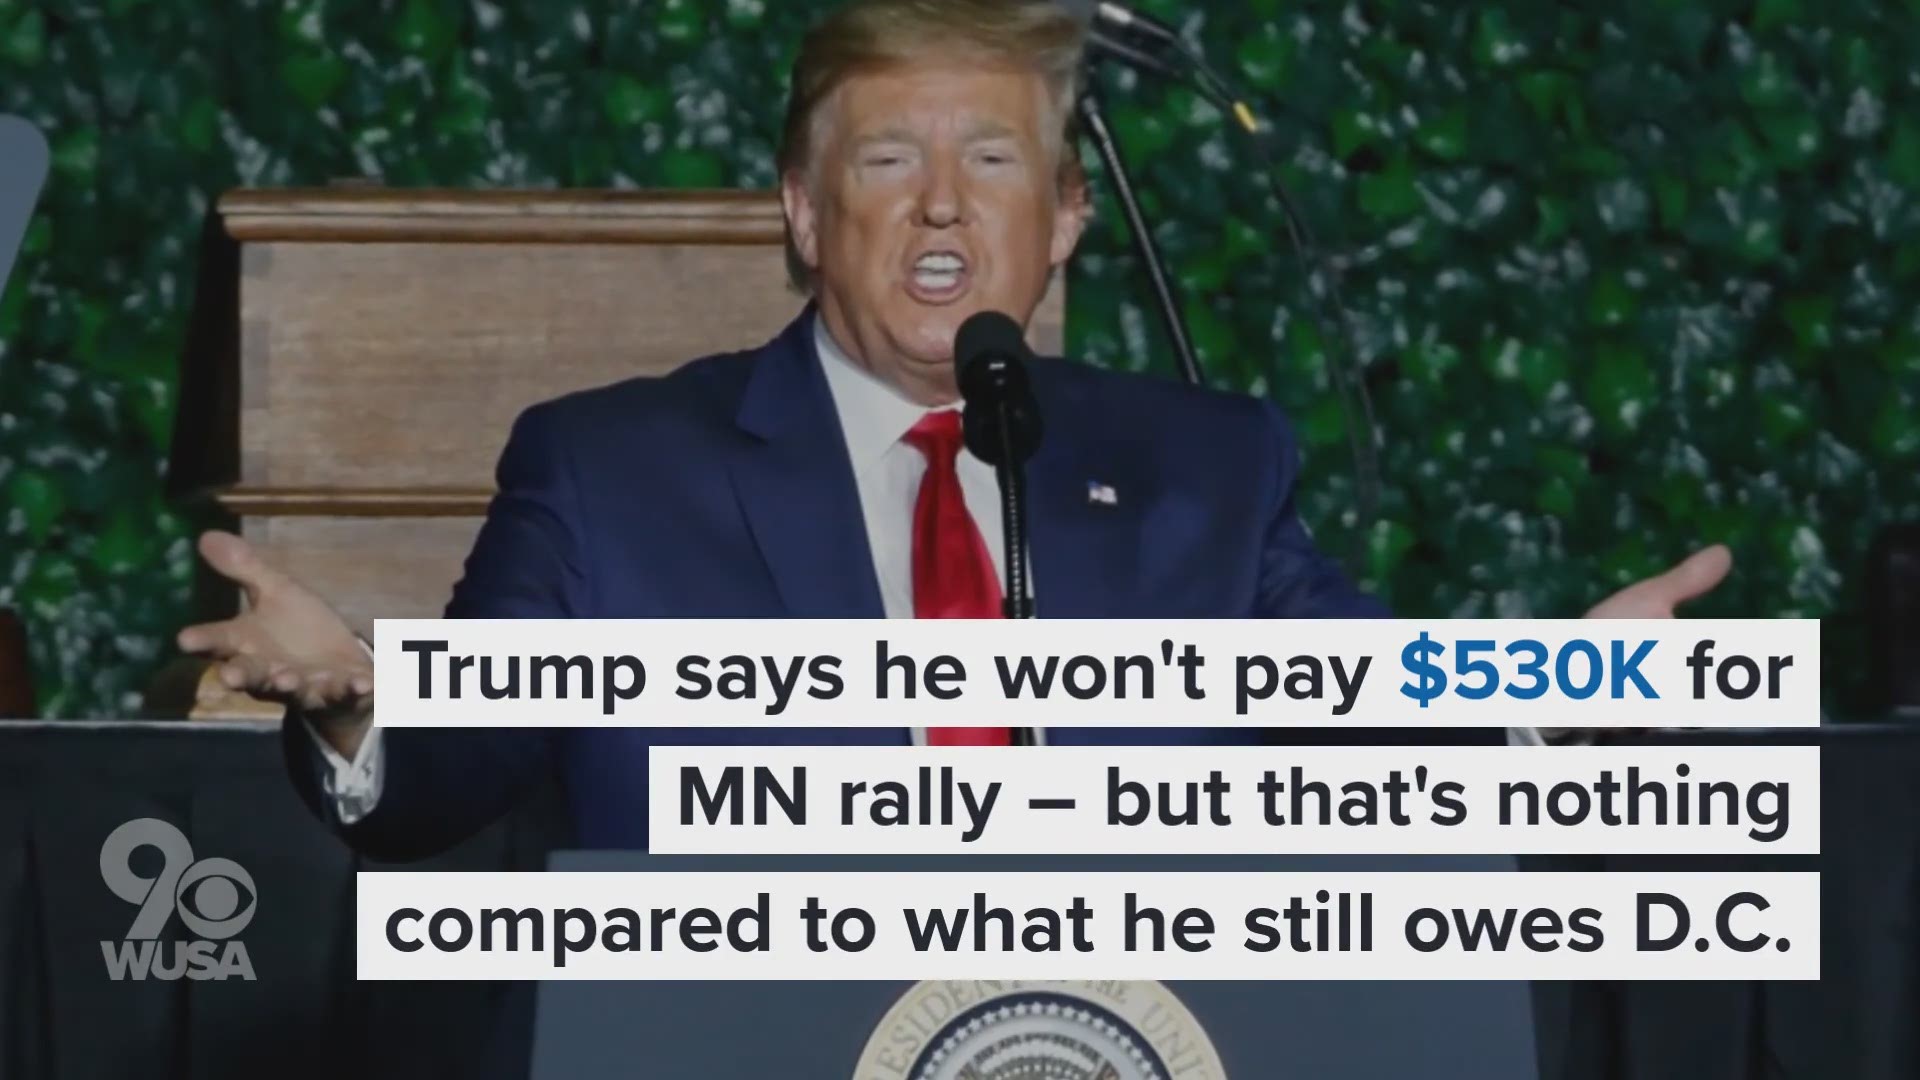 The president, who called himself "the king of debt," has threatened to sue the Target Center over a bill for security. He's never paid any of his DC expenses.